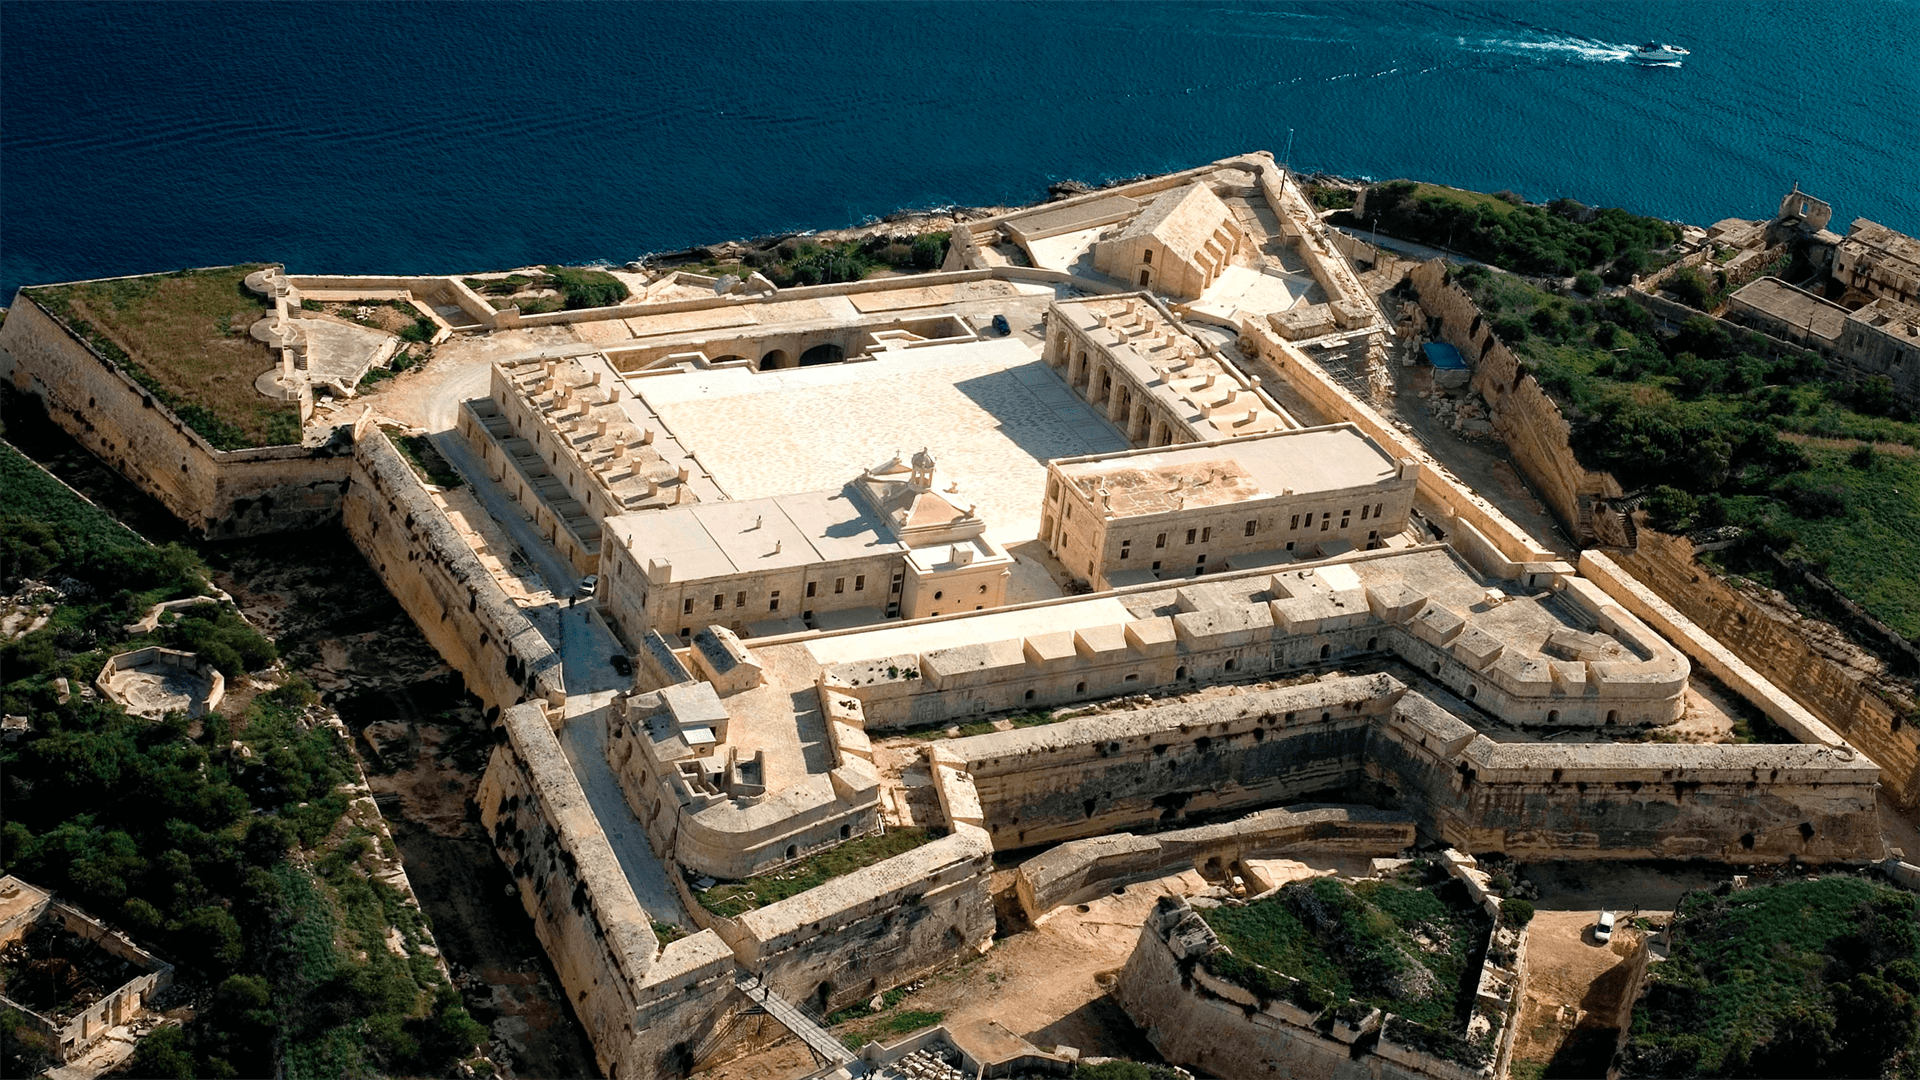 The Manoel Island Foundation, is a non-profit foundation set up to act as guardian of the rights and obligations agreed to between MIDI plc and the Gzira Local Council as set out in a Guardianship Deed.